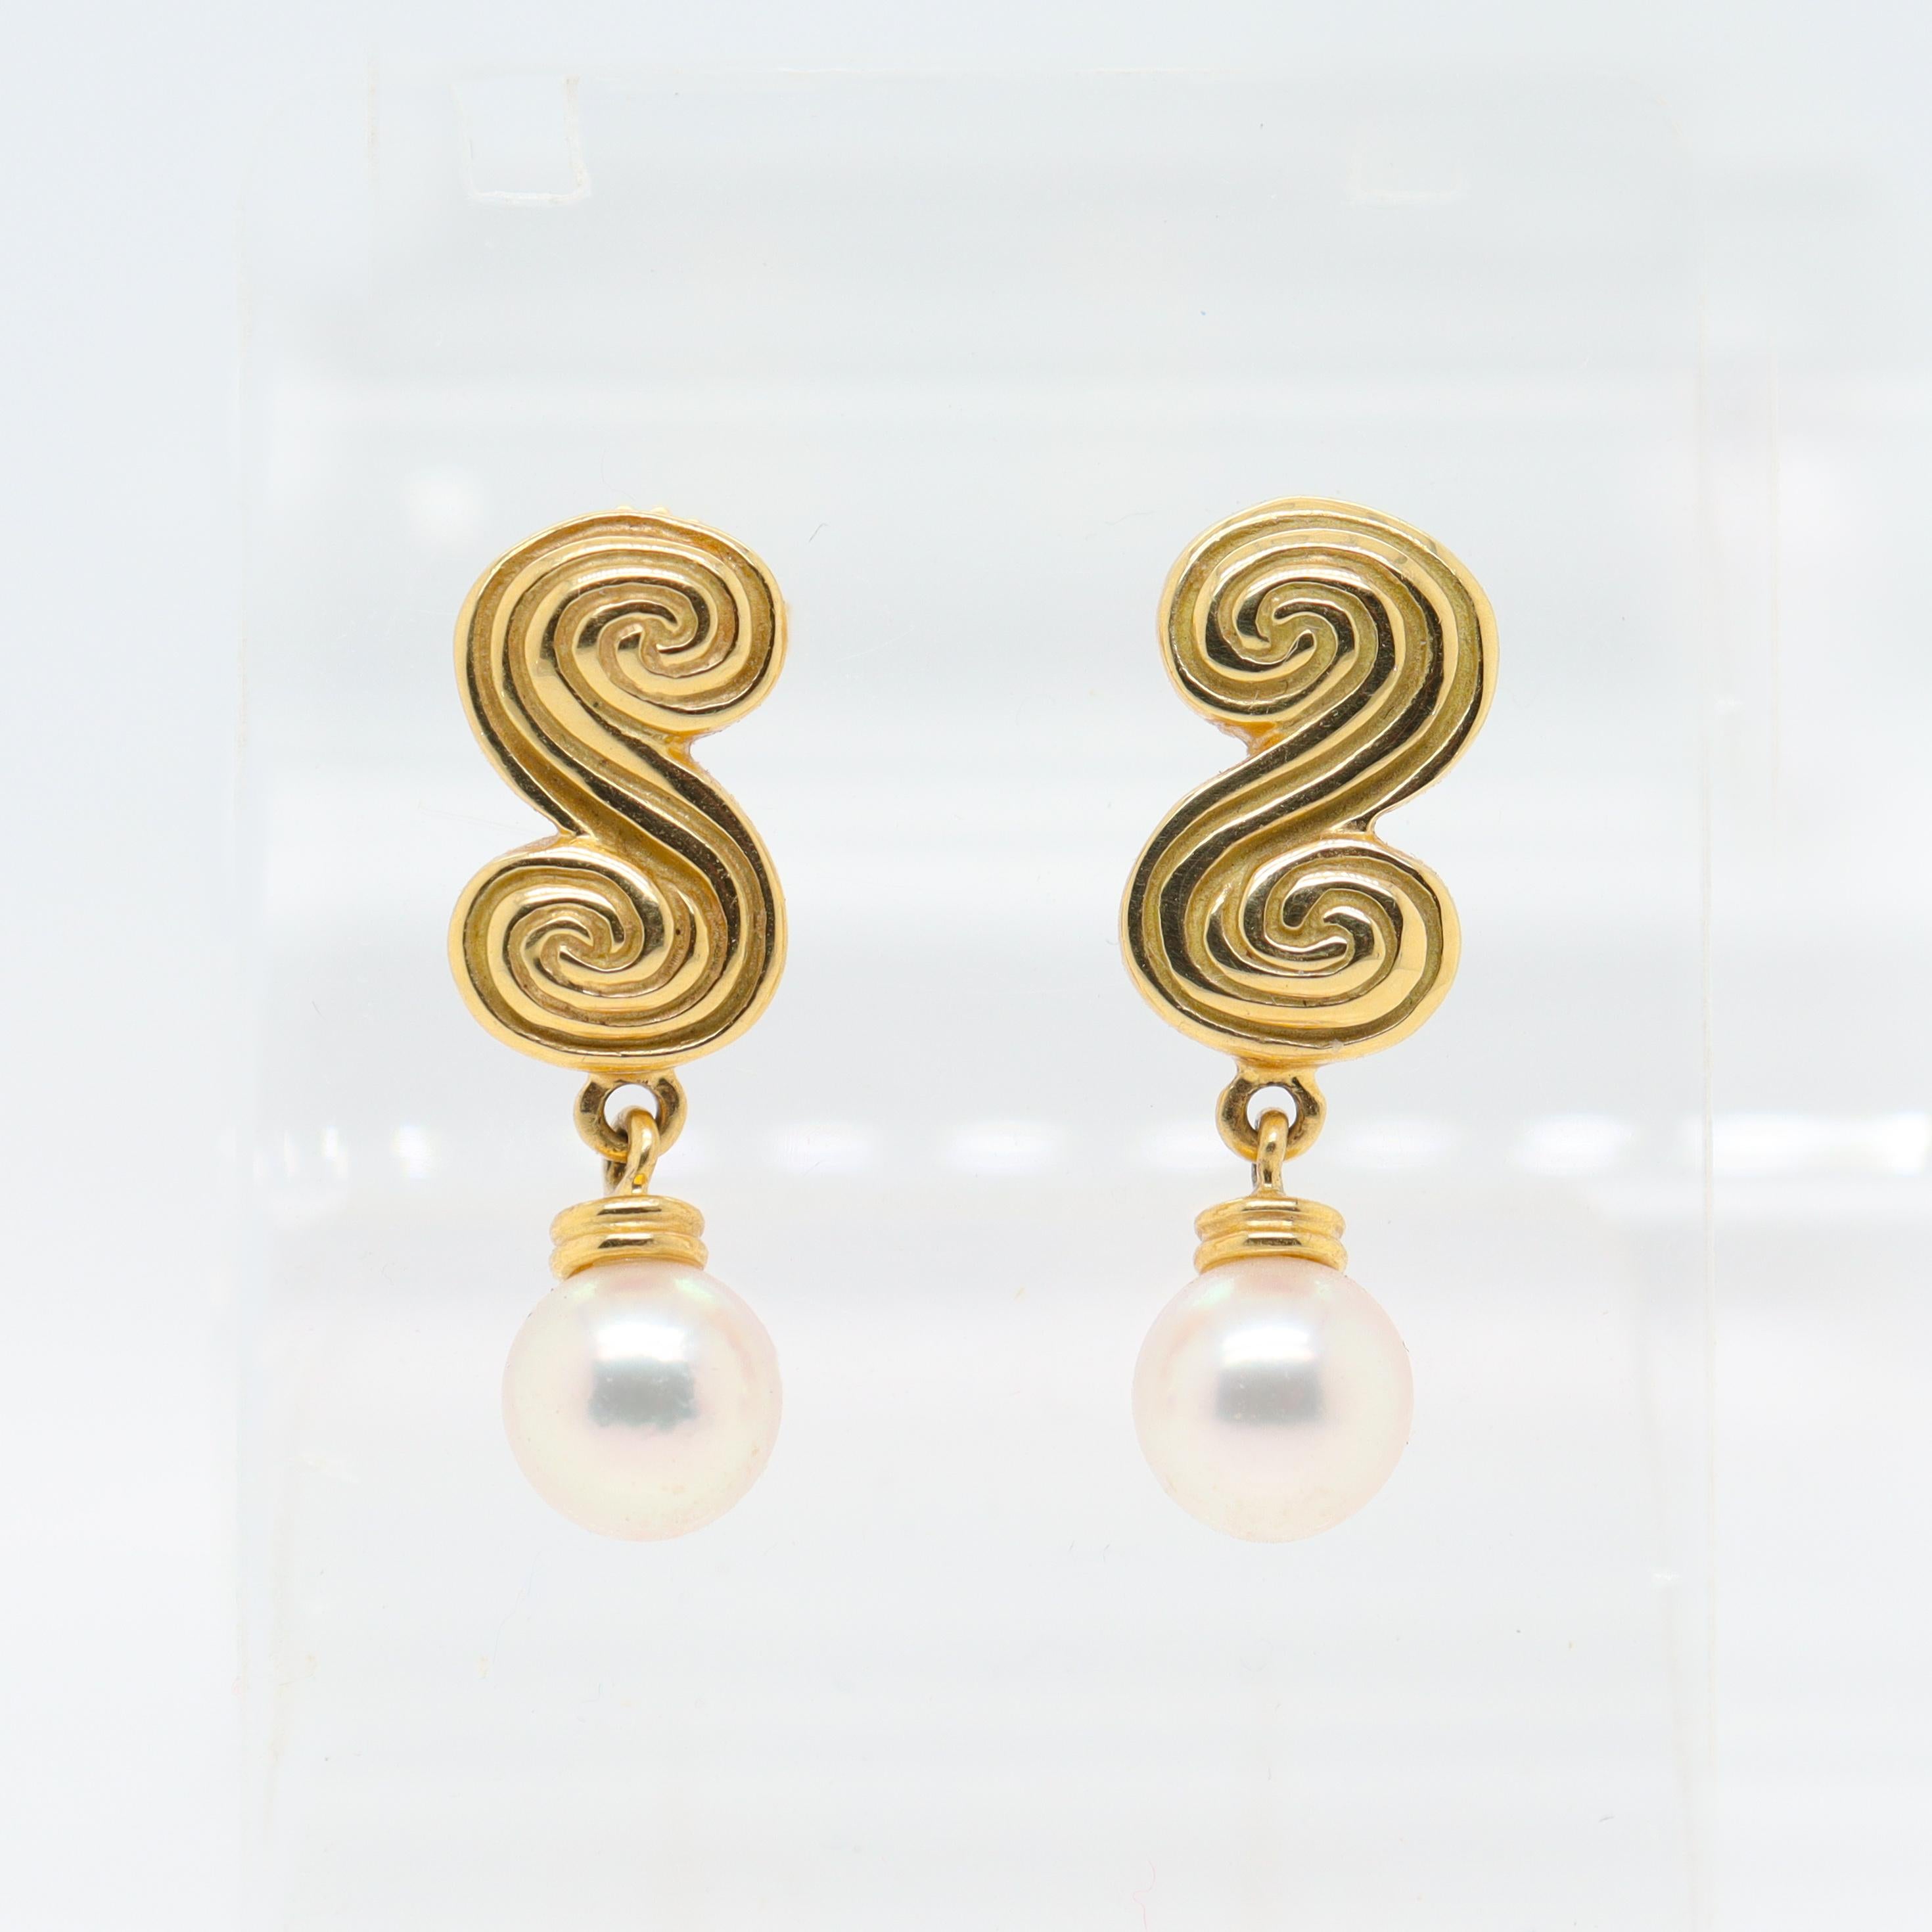 A fine pair of vintage Tiffany & Co. gold & pearl earrings.

In 18K gold.

In the double spiral or 